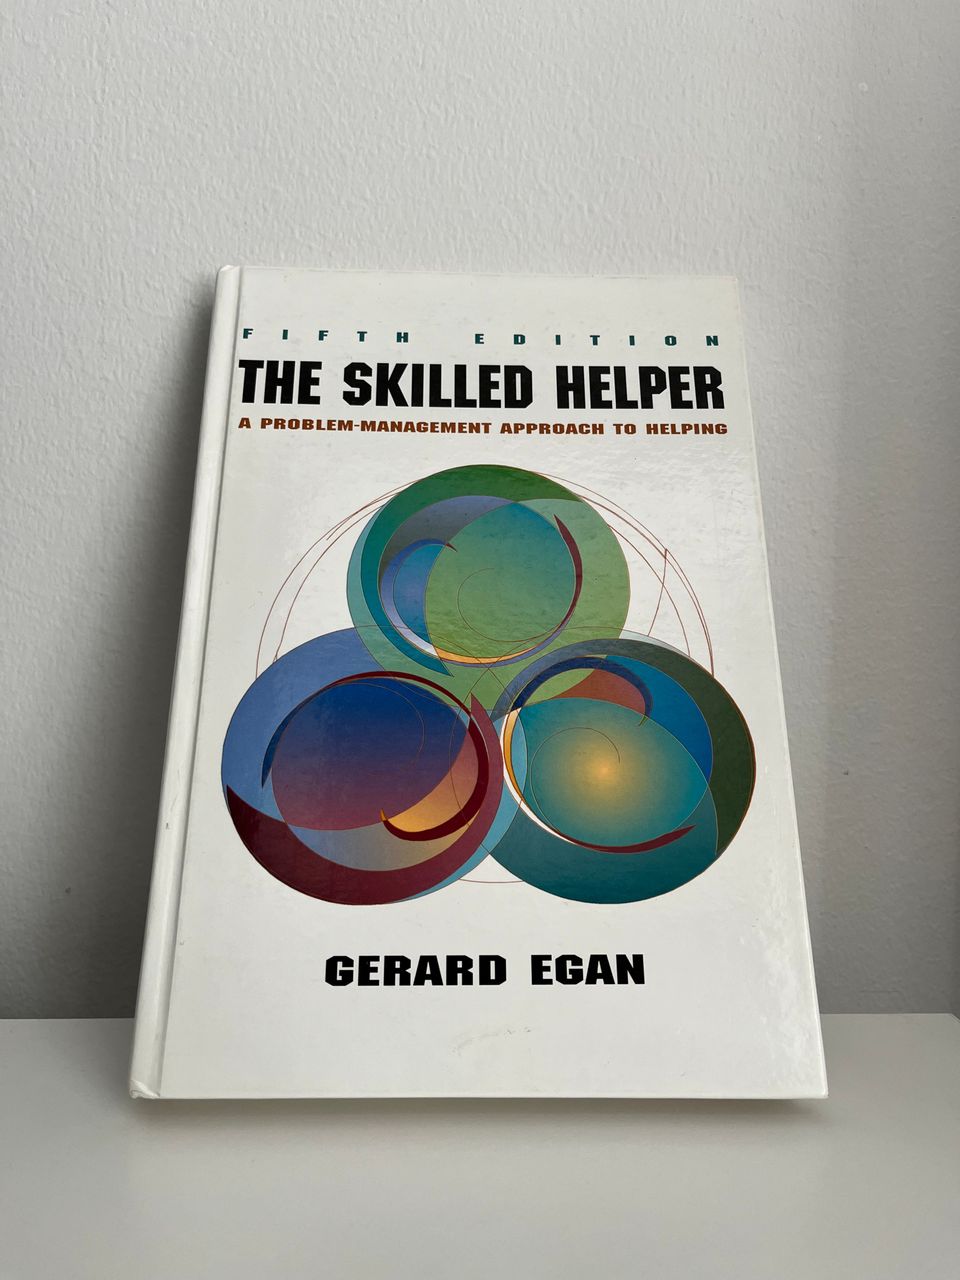 The Skilled Helper - A problem-management approach to helping